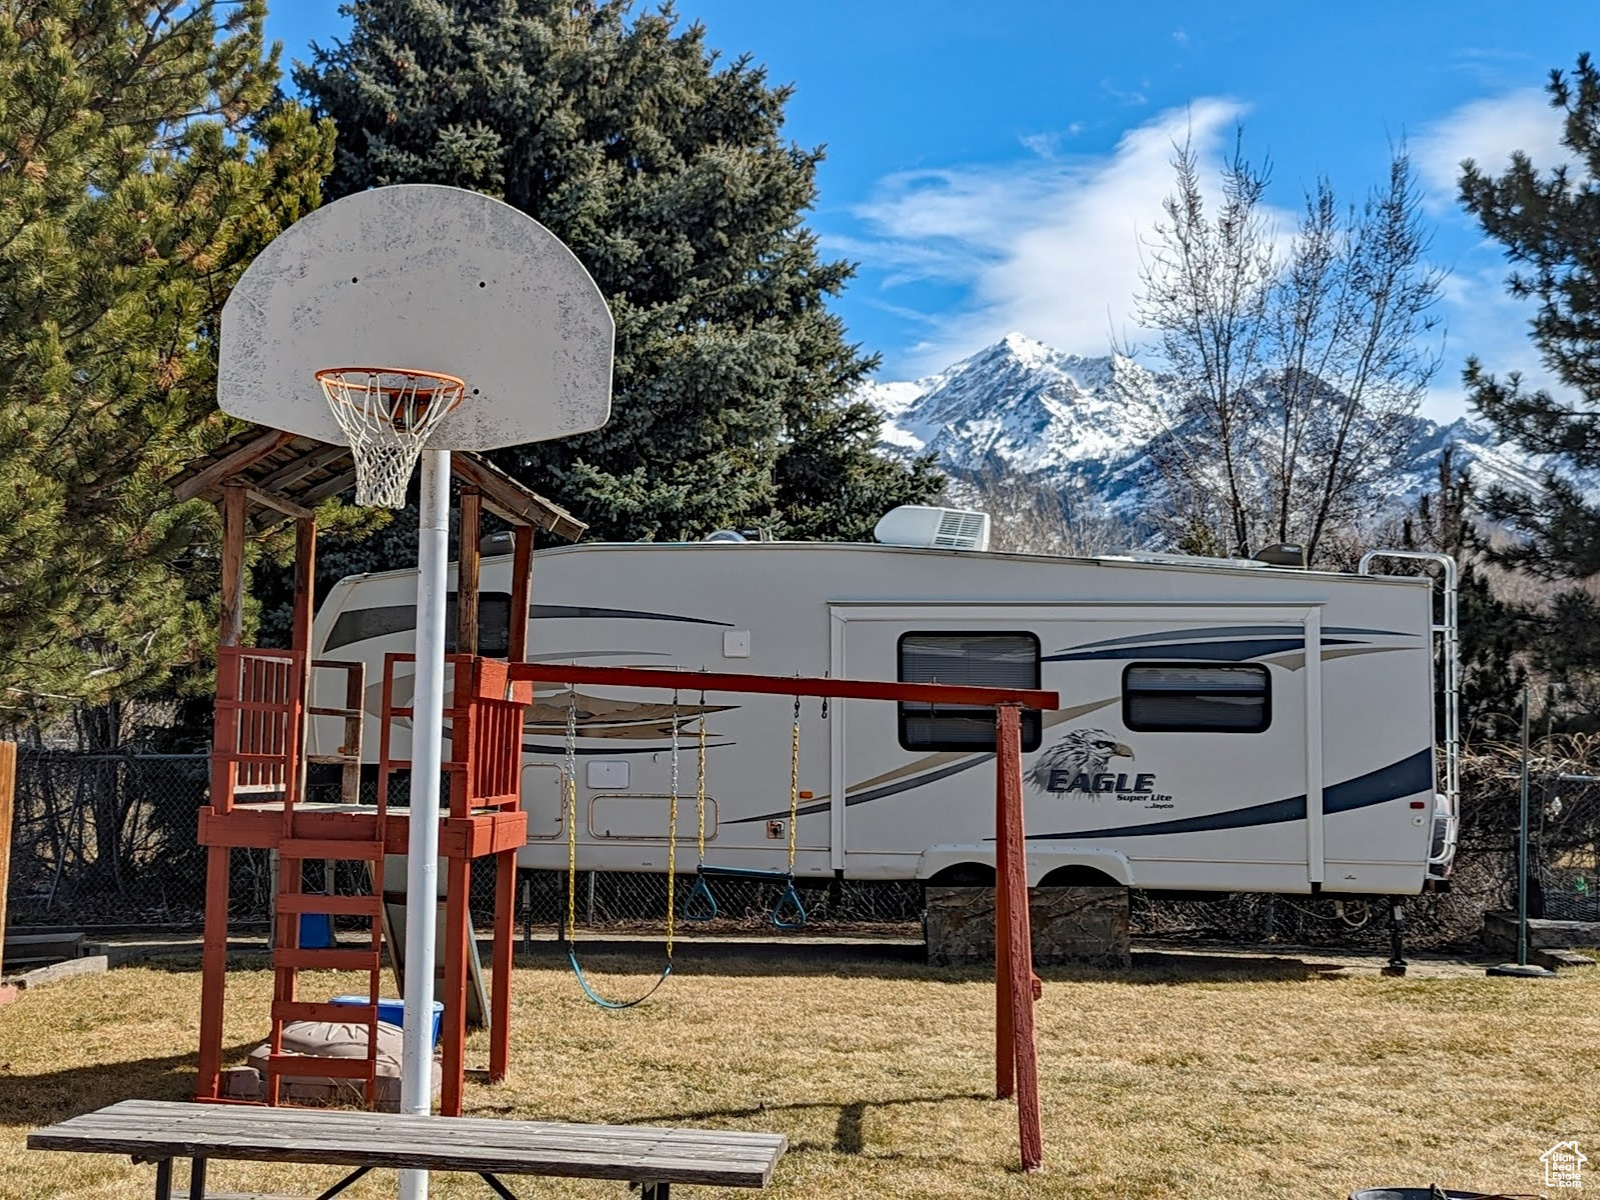 Long RV pad with Basketball court and swing set. Views of the Mountains